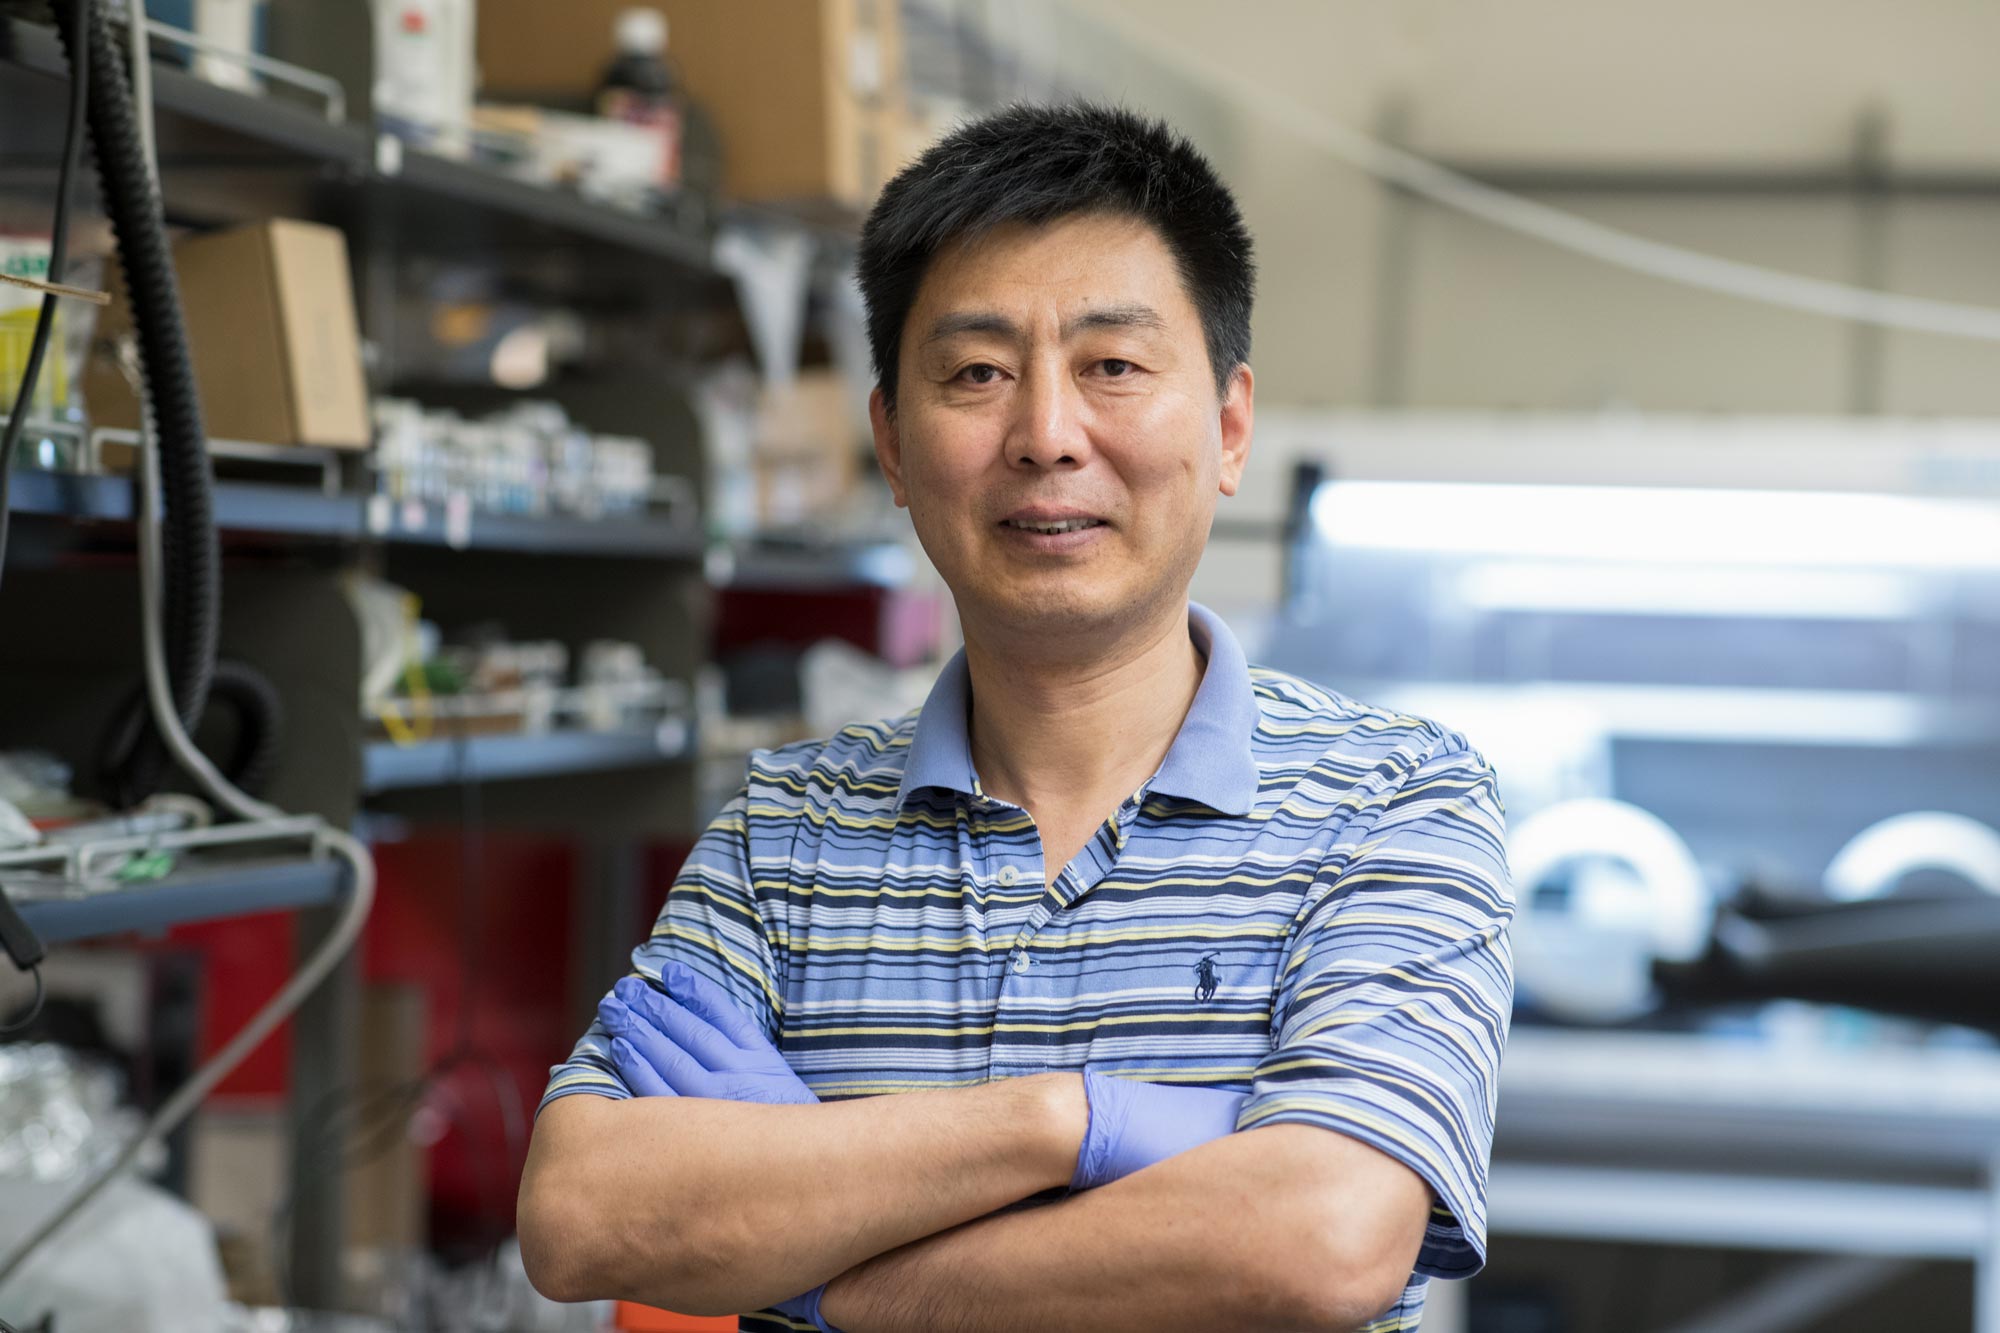 Xiaodong “Chris” Li, a UVA professor of mechanical and aerospace engineering, is creating sensors that give 3-D printers a human-like ability to “make real-time decisions” to create flawless products. (Photo by Dan Addison, University Communications)